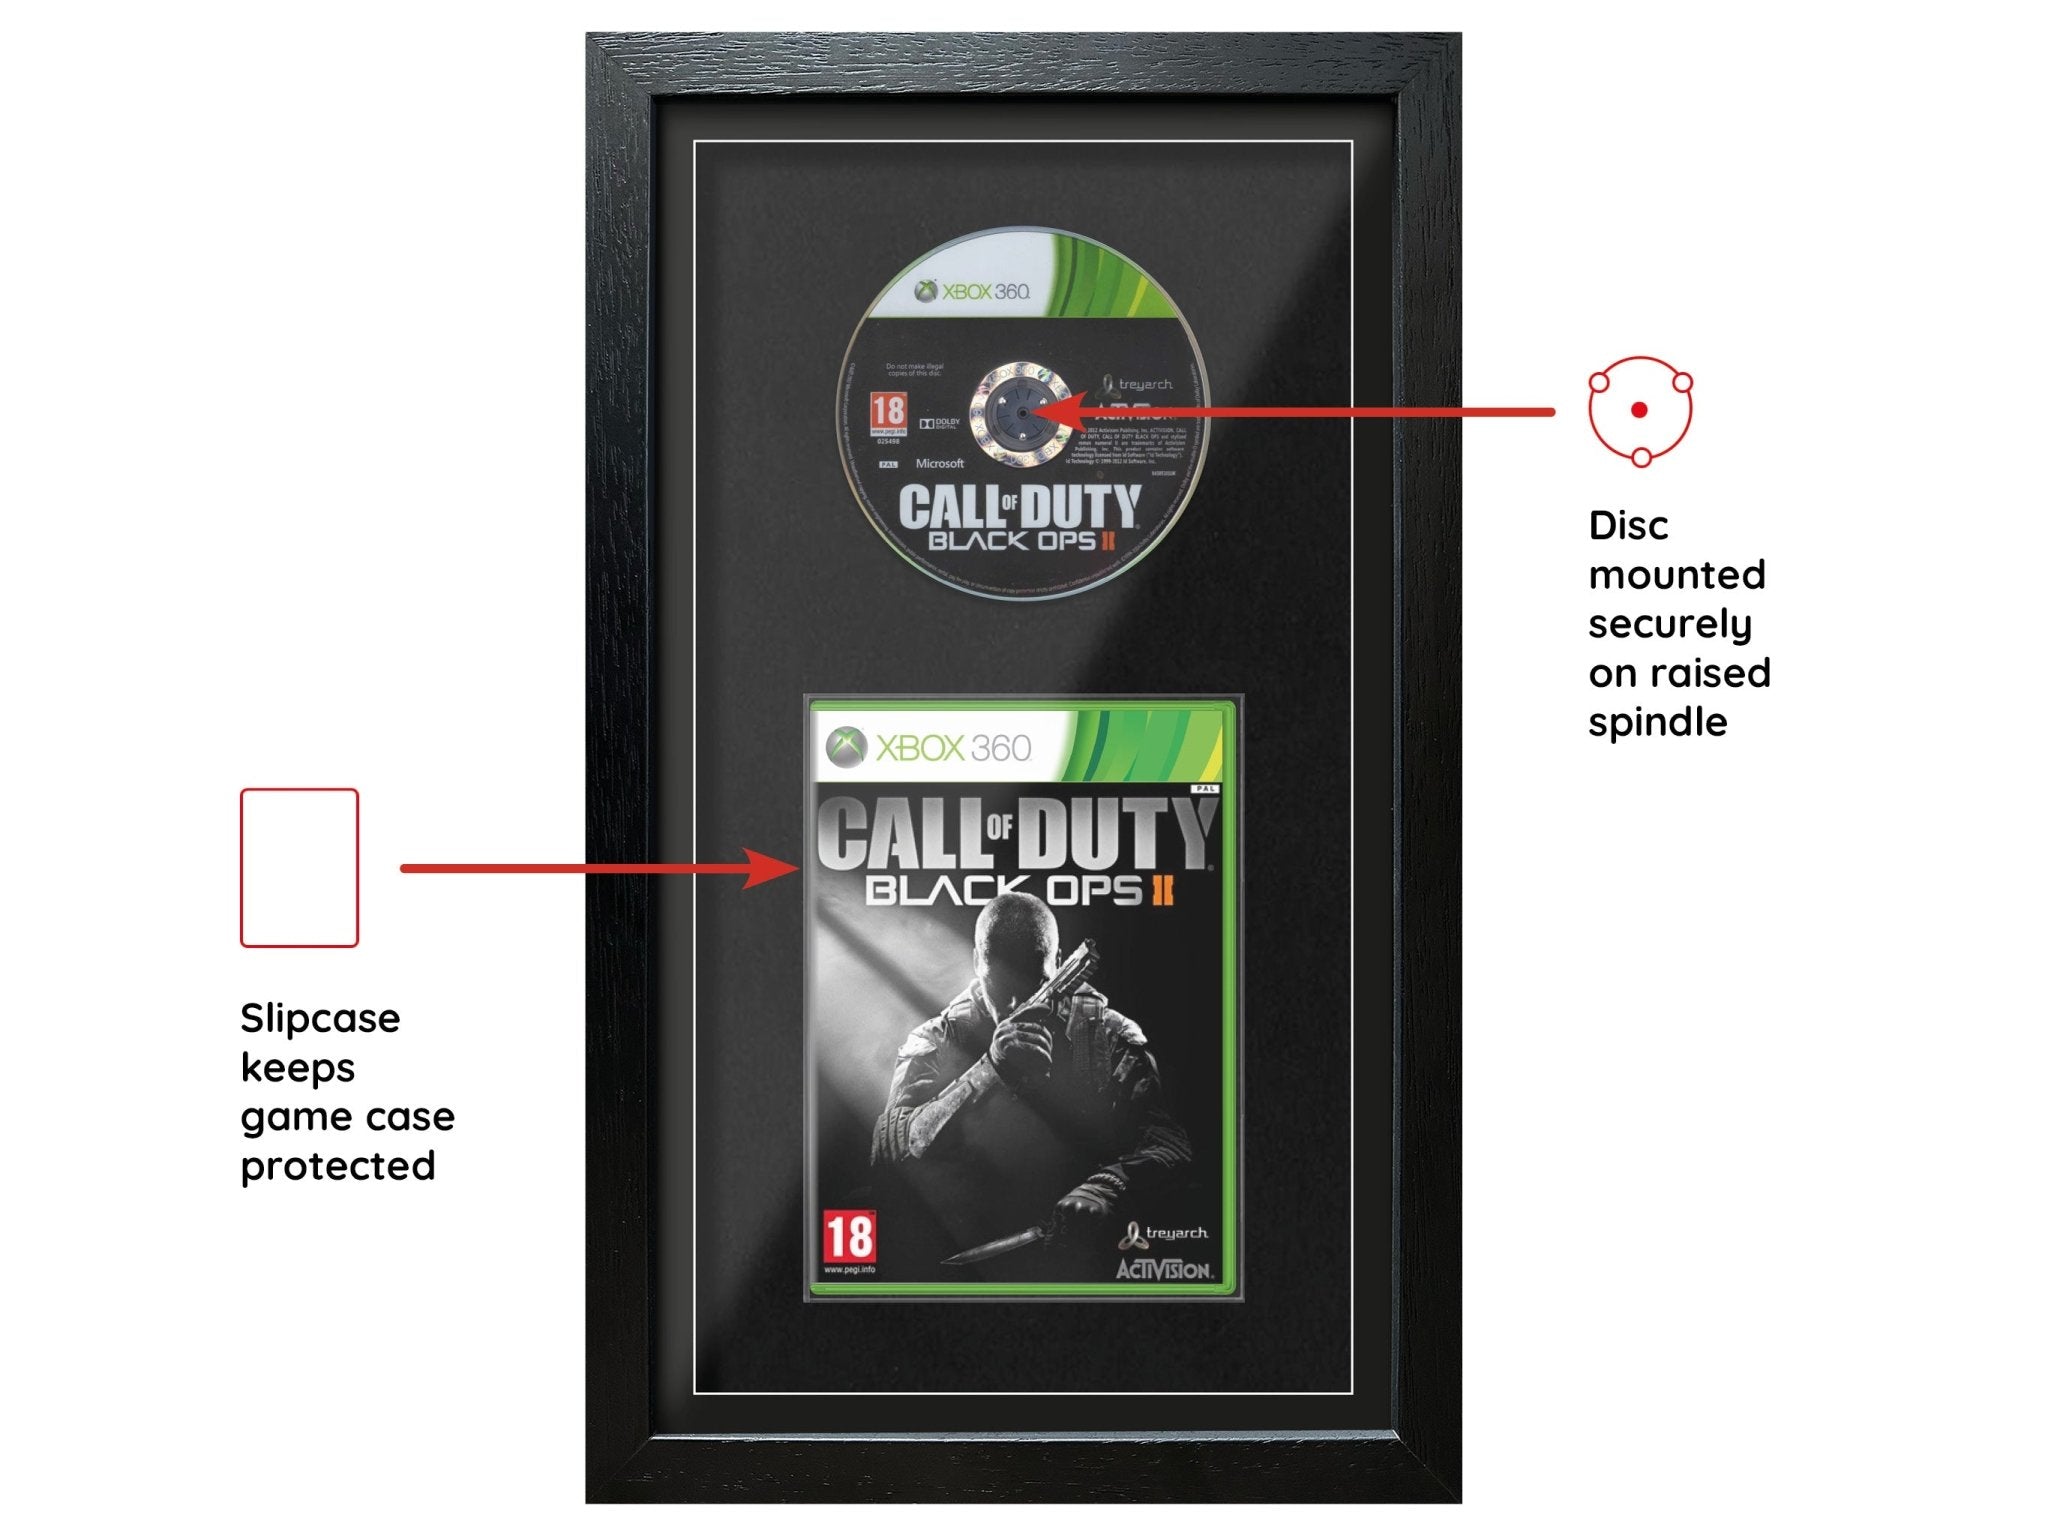 Call of Duty: Black Ops II (Xbox 360) Exhibition Range Framed Game - Frame-A-Game